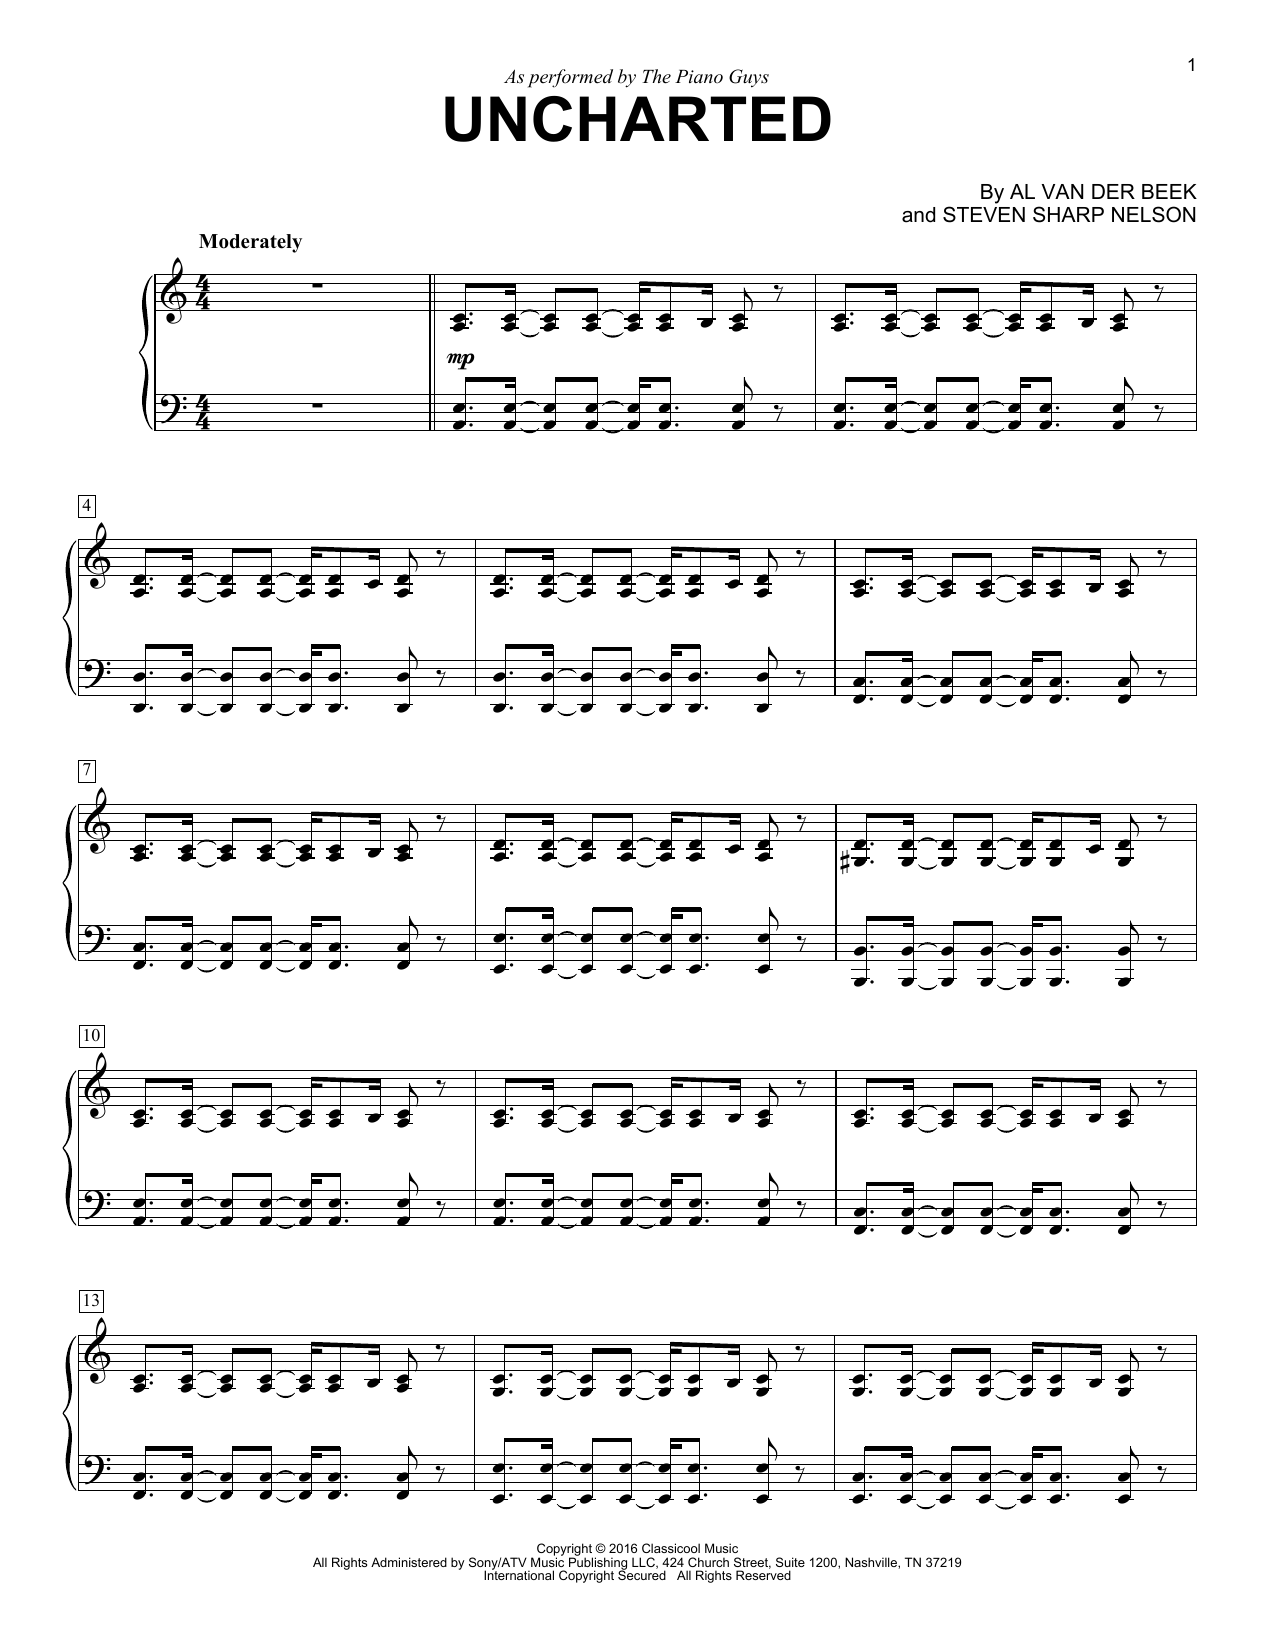 Download The Piano Guys Uncharted Sheet Music